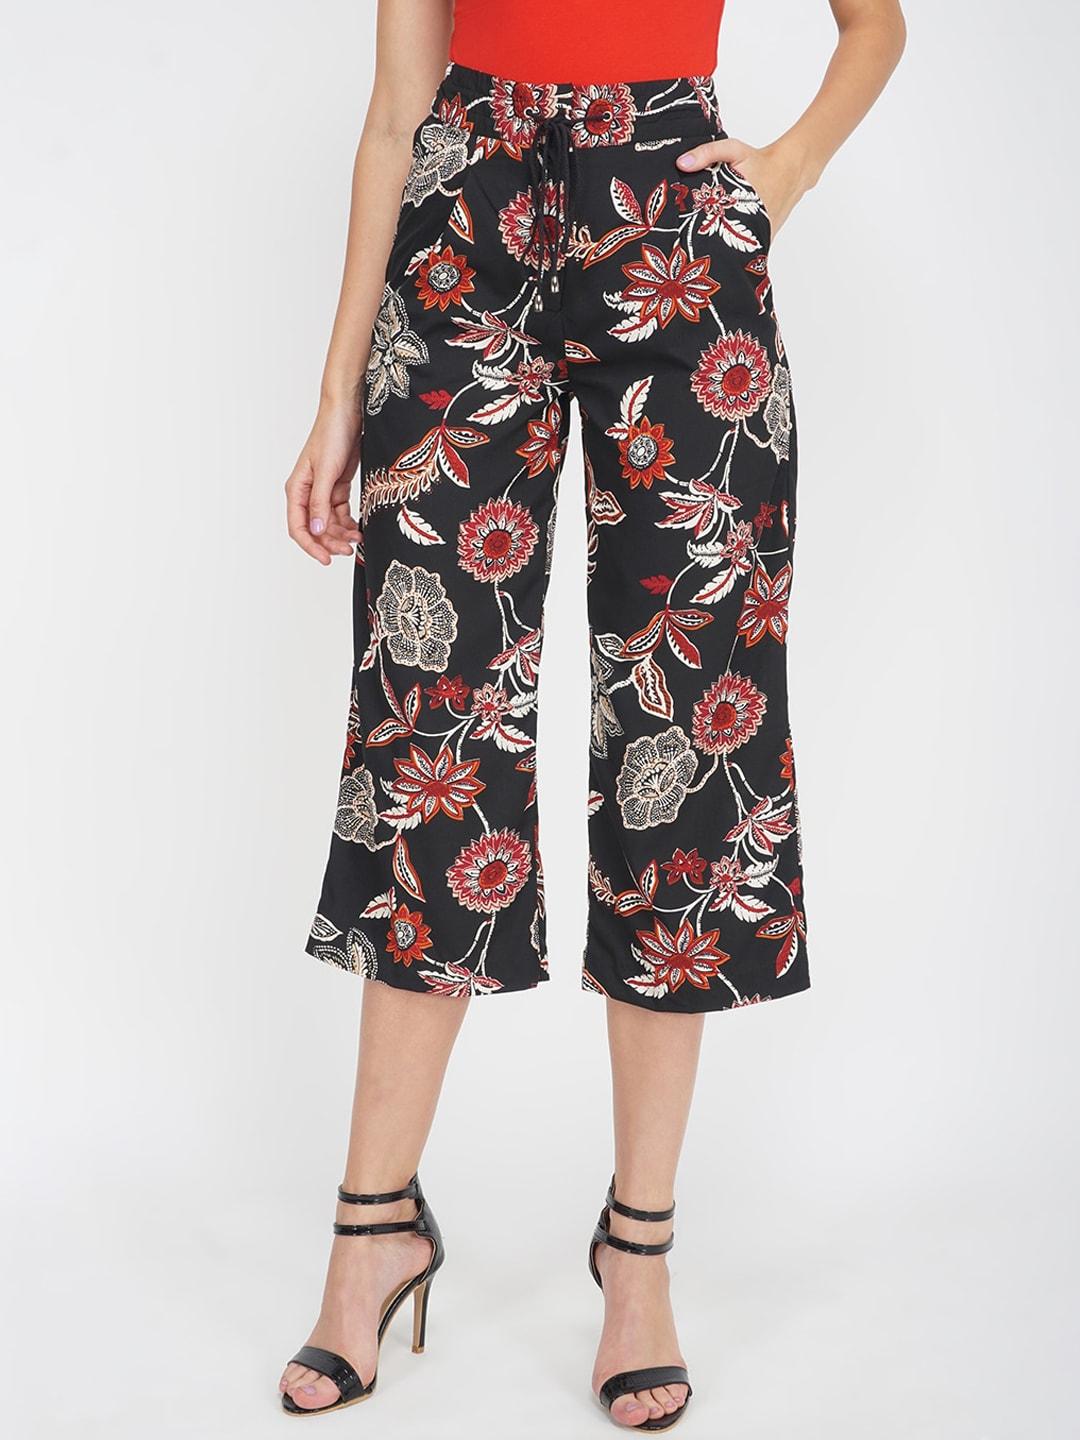 oxolloxo-women-black-floral-printed-high-rise-culottes-trousers